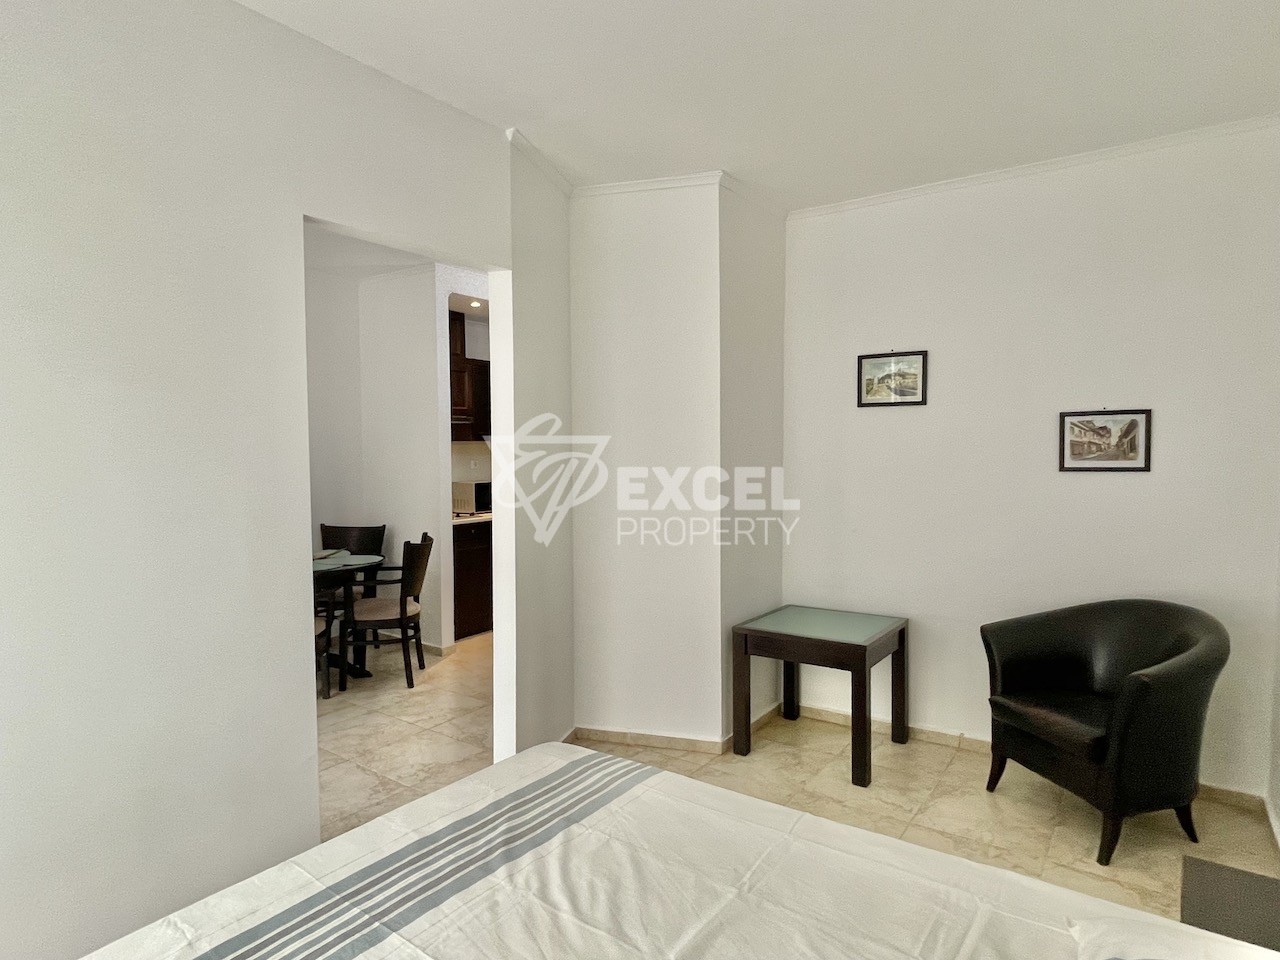 One-bedroom apartment in Obzor, only 150 m from the sea - the Cllif complex